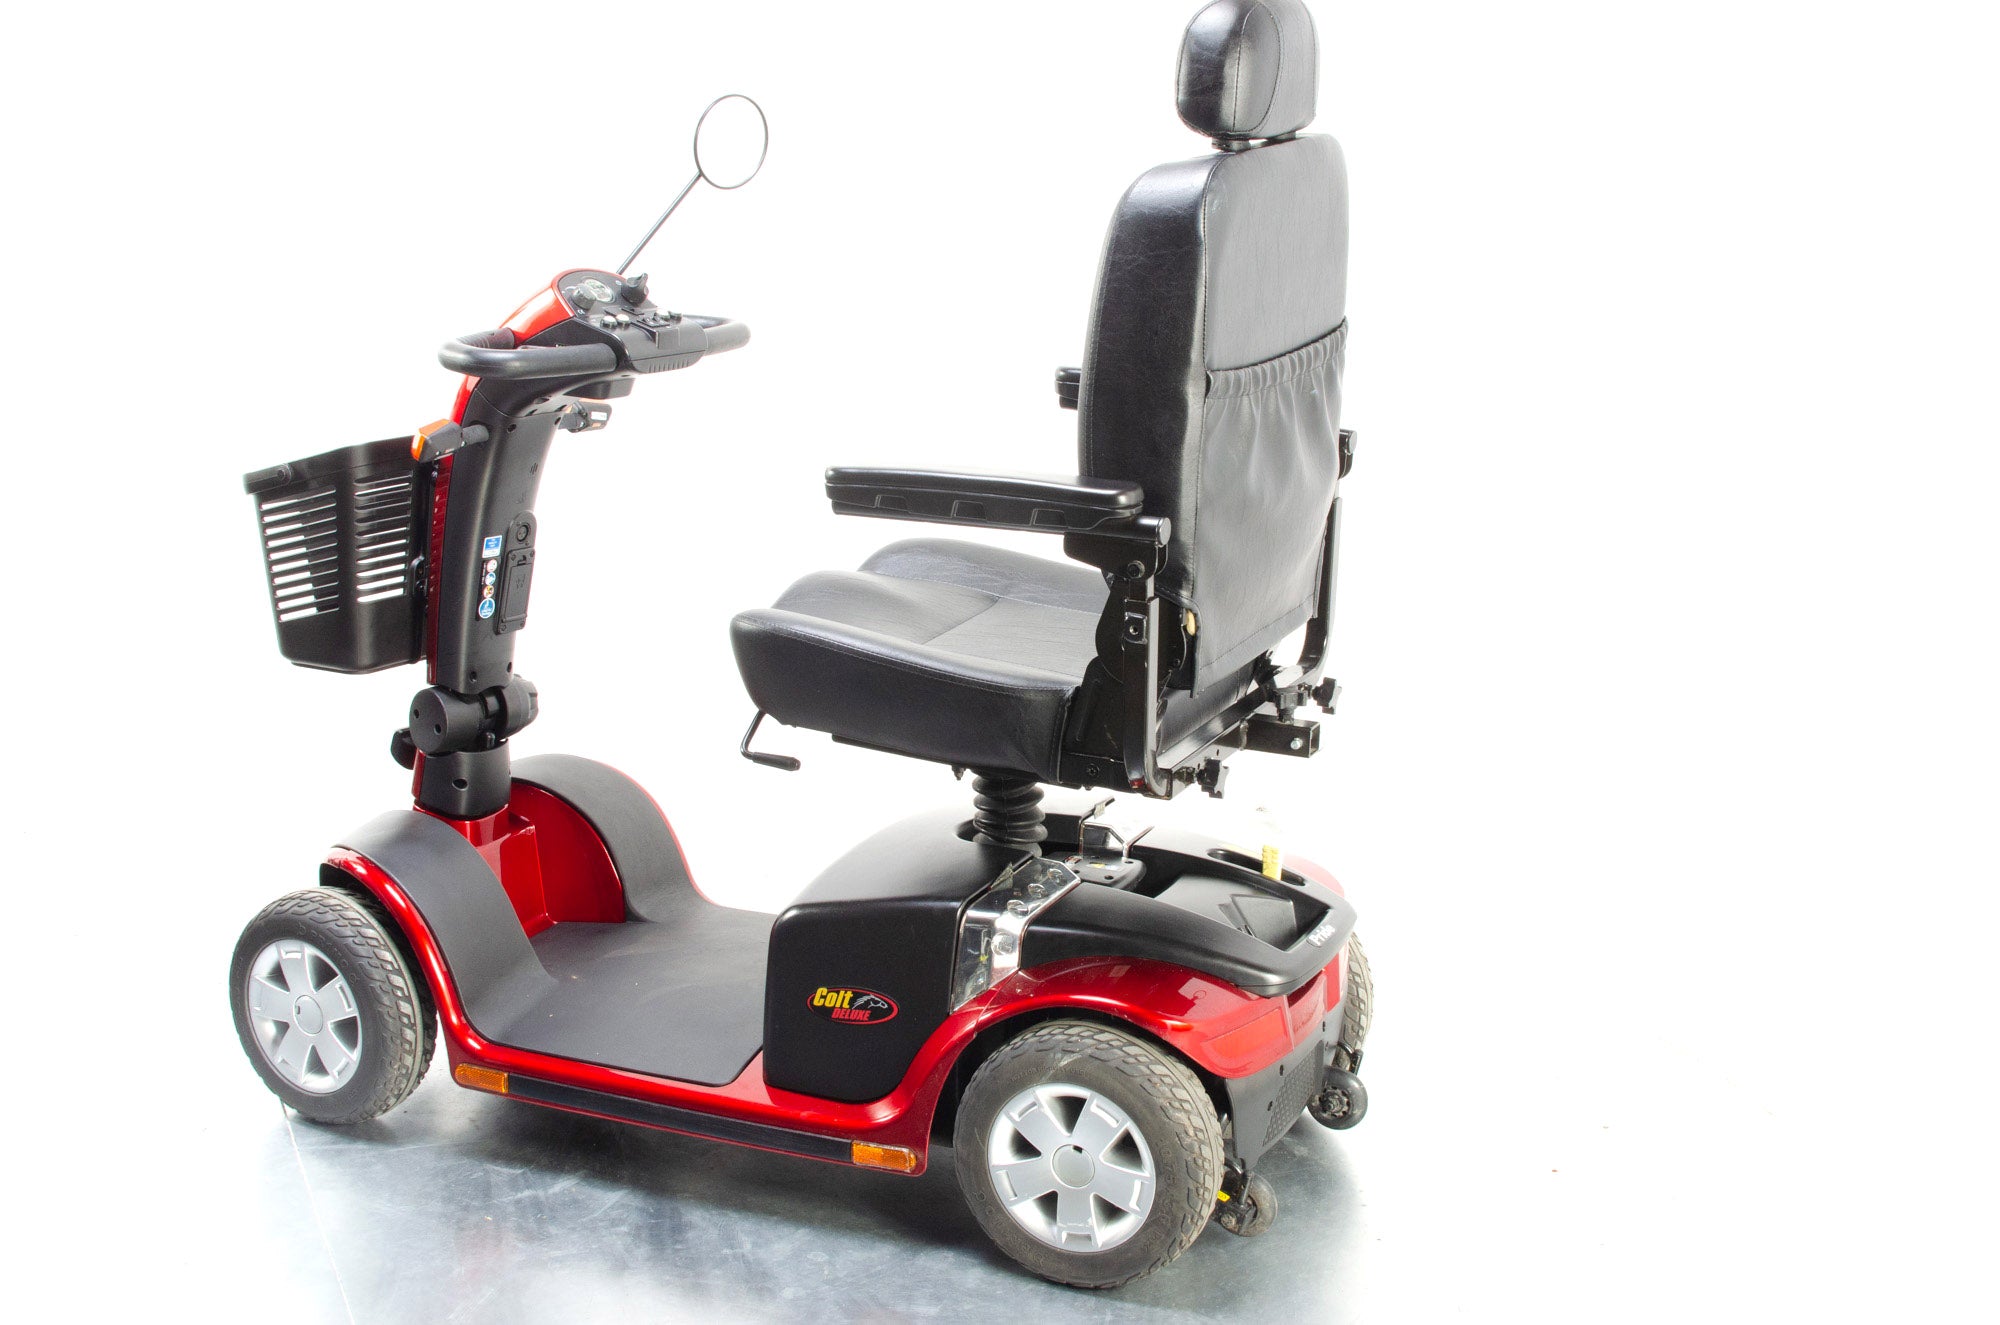 Pride Colt Deluxe Electric Mobility Scooter Used Transportable Folding 6mph Road Pavement